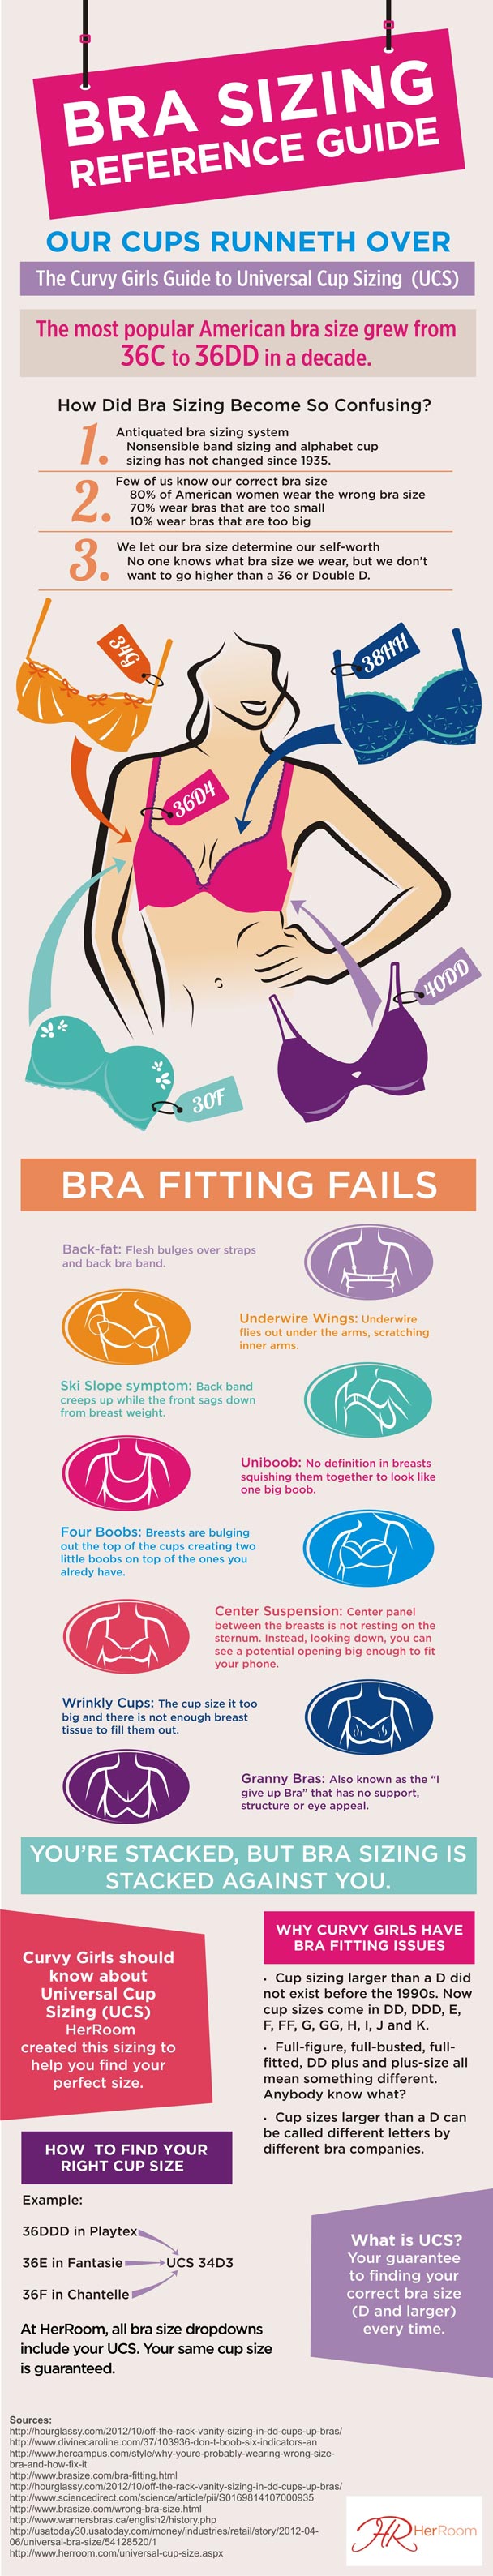 Inside The Fitting Room™ Video Vault: Bra Fitting & Sizing